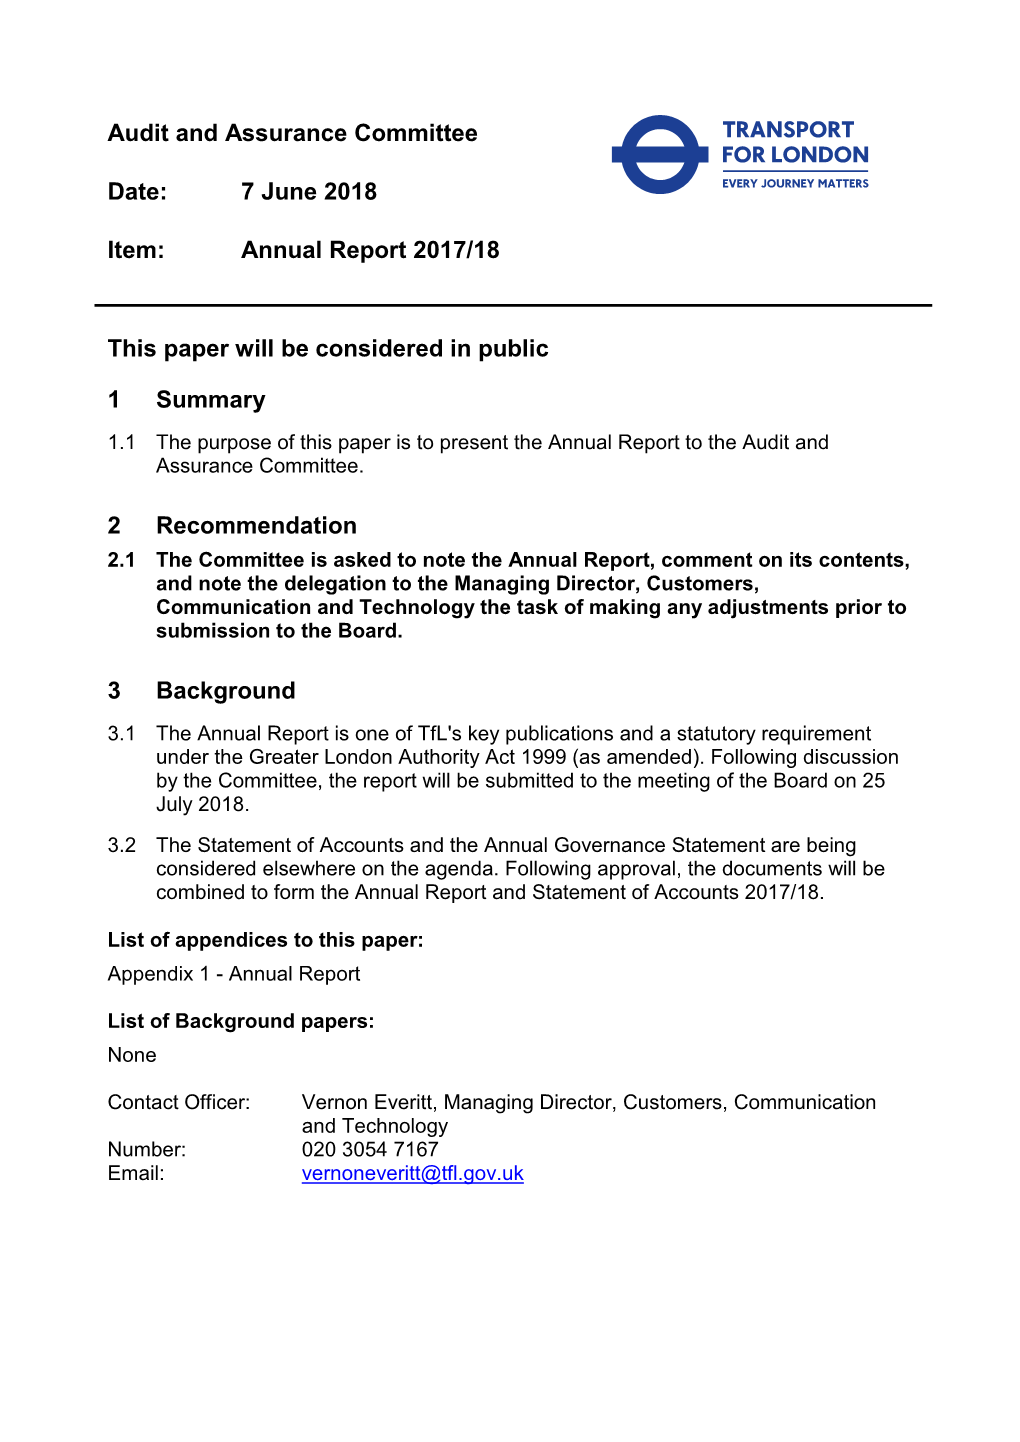 Audit and Assurance Committee Date: 7 June 2018 Item: Annual Report 2017/18 This Paper Will Be Considered in Public 1 Summary